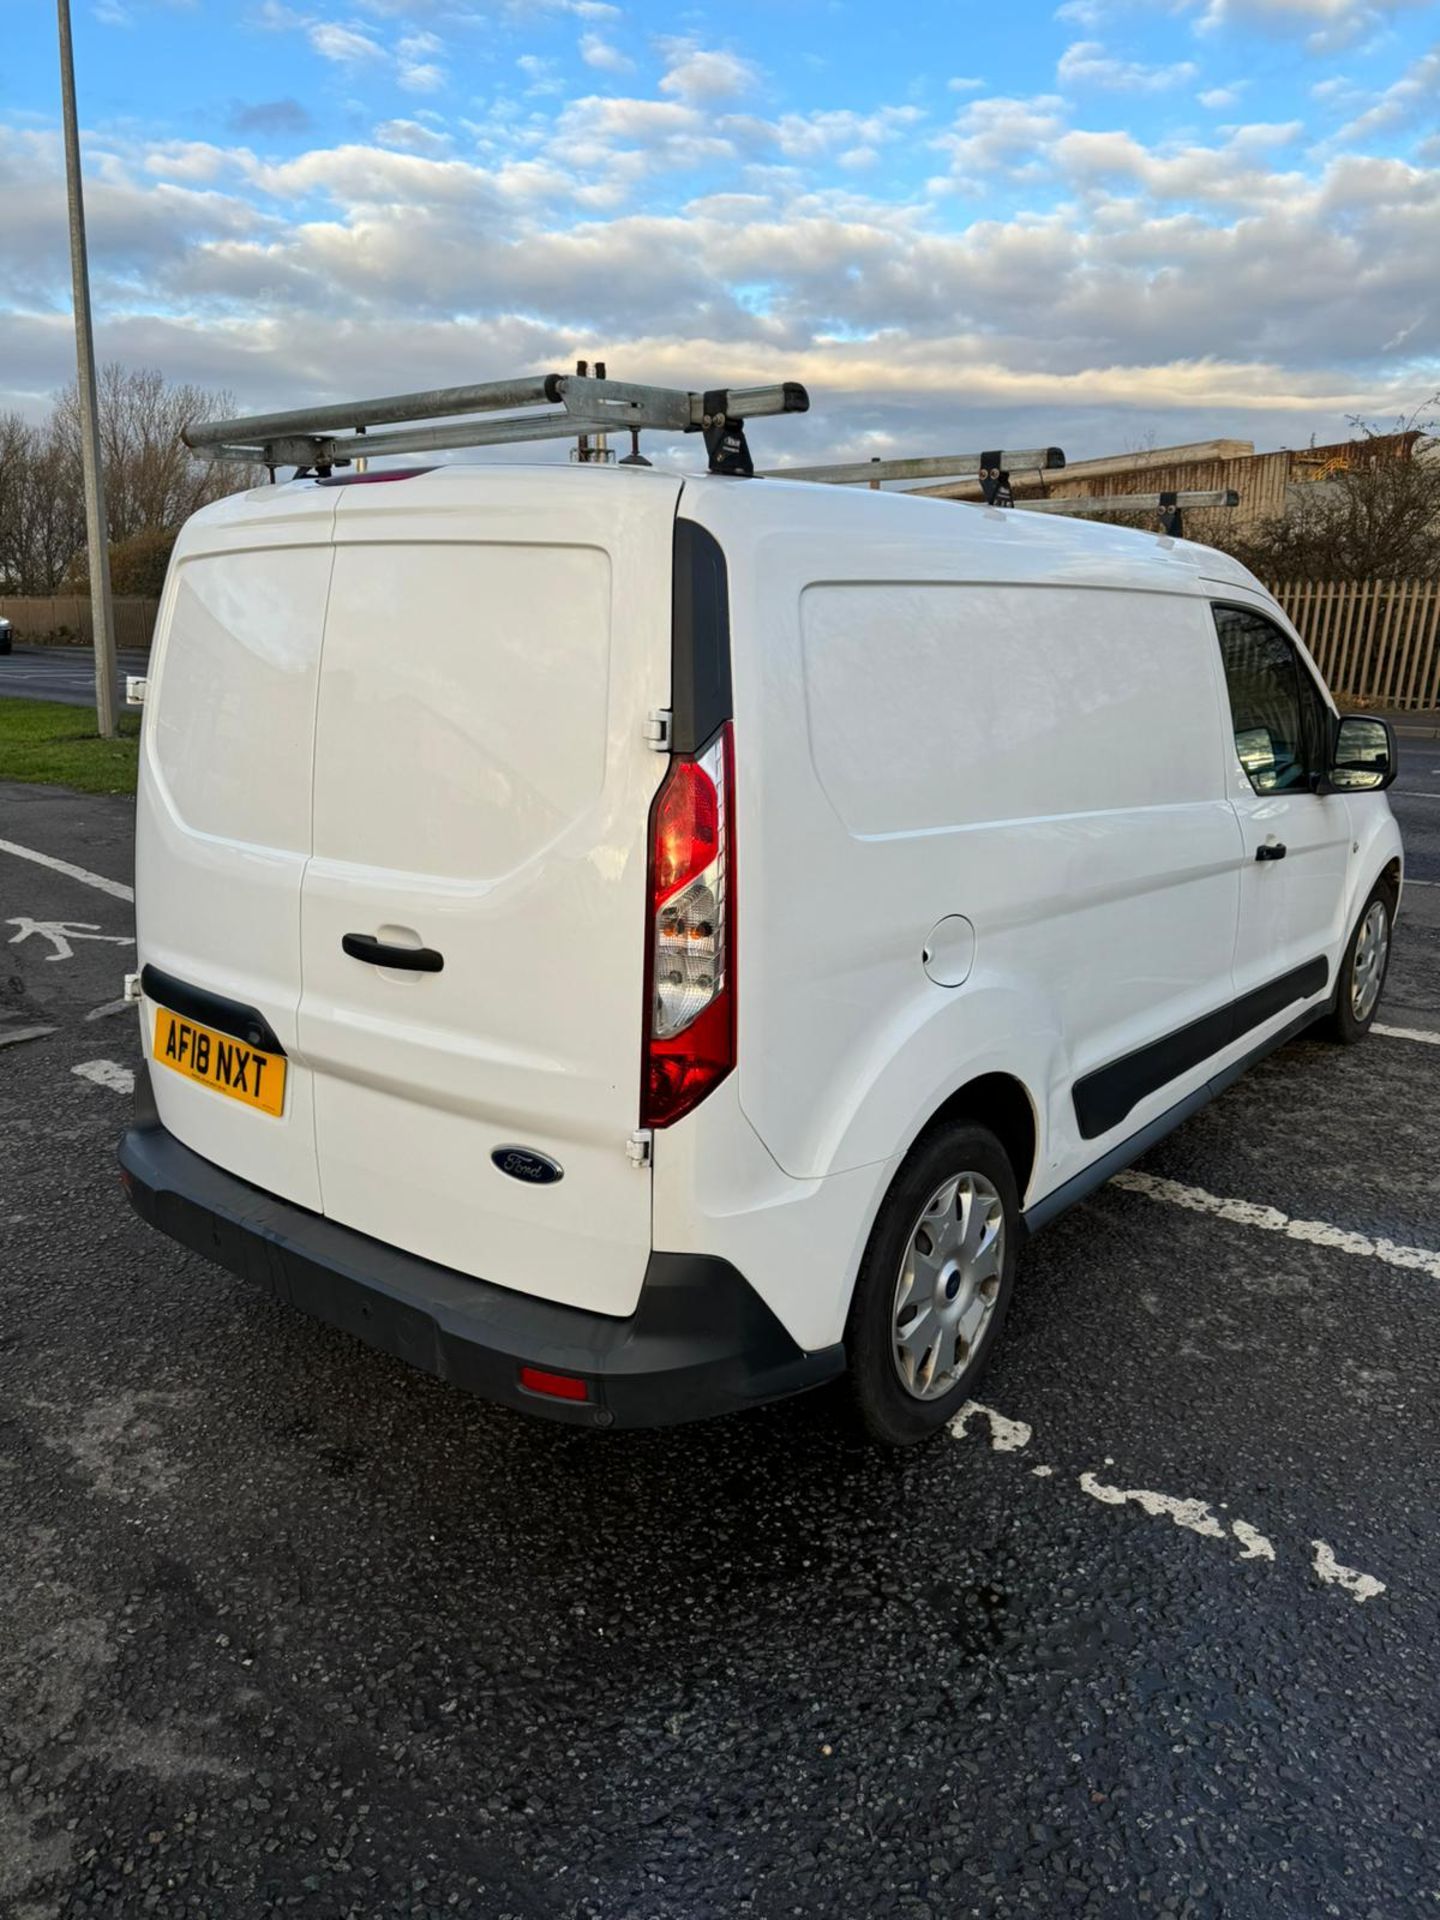 2018 18 FORD TRANSIT CONNECT TREND PAENL VAN - 128K MILES - EURO 6 - 3 SEATS - LWB - ROOF RACK. - Image 2 of 11